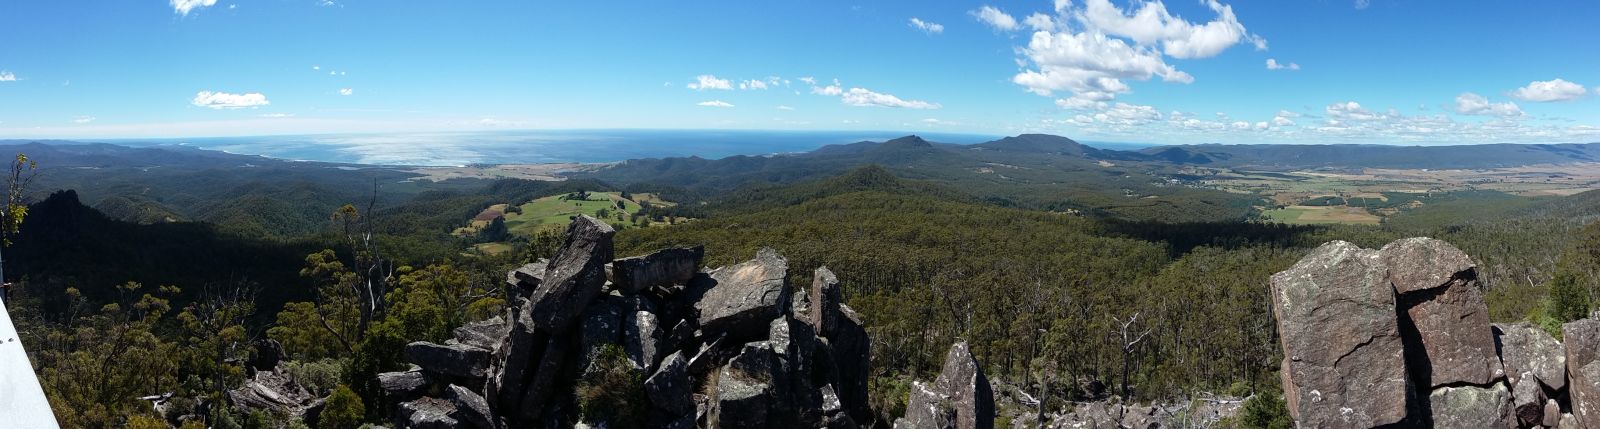 The view from South Sister overlooking St. Mary’s, eastern Tasmania